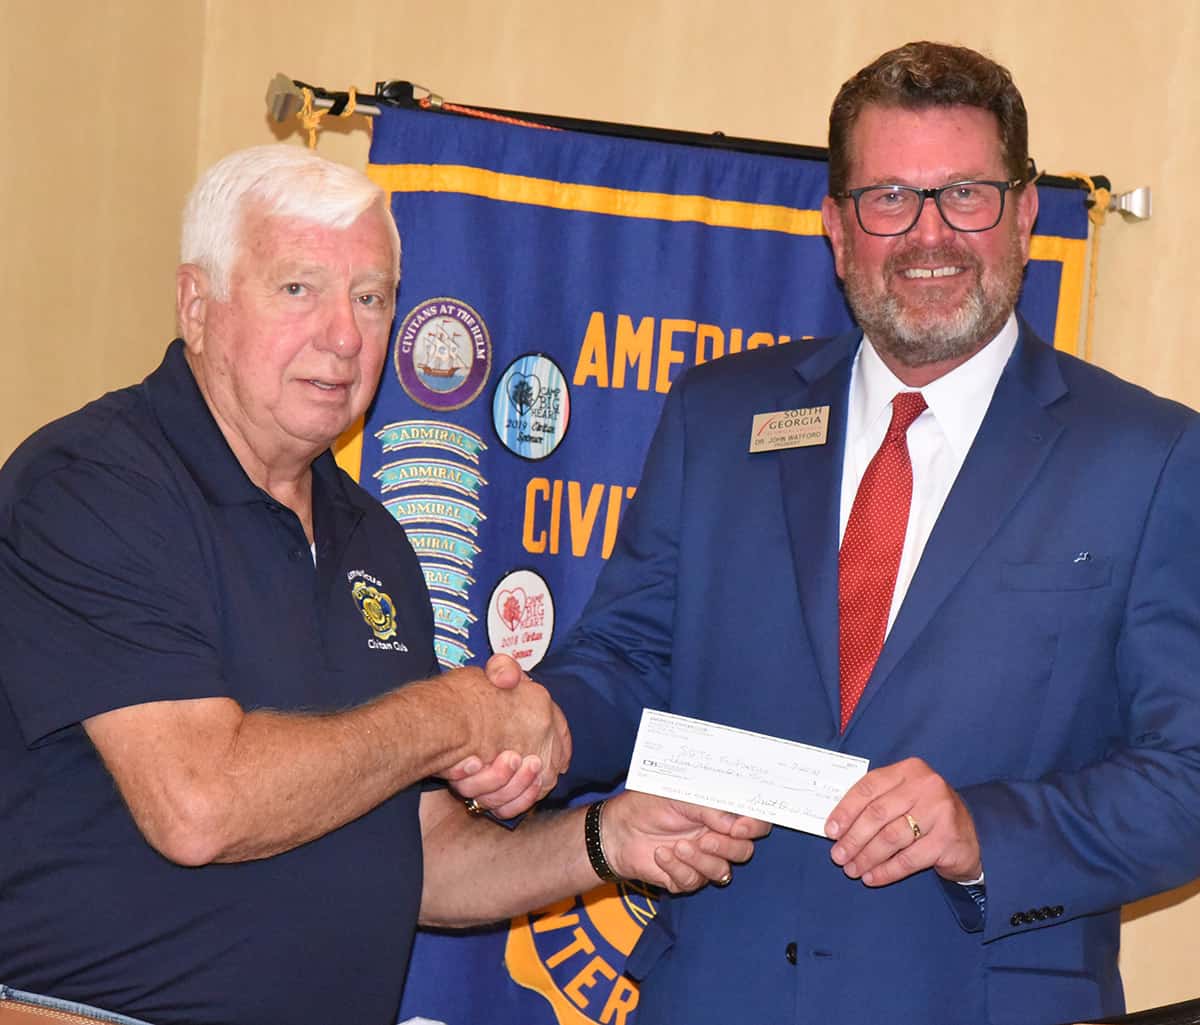 Grant Williams (left) of the Americus Civitan Club is shown above presenting a check to South Georgia Technical College President Dr. John Watford (right) for the Americus Civitan Club’s endowed scholarship for nursing students at South Georgia Technical College.